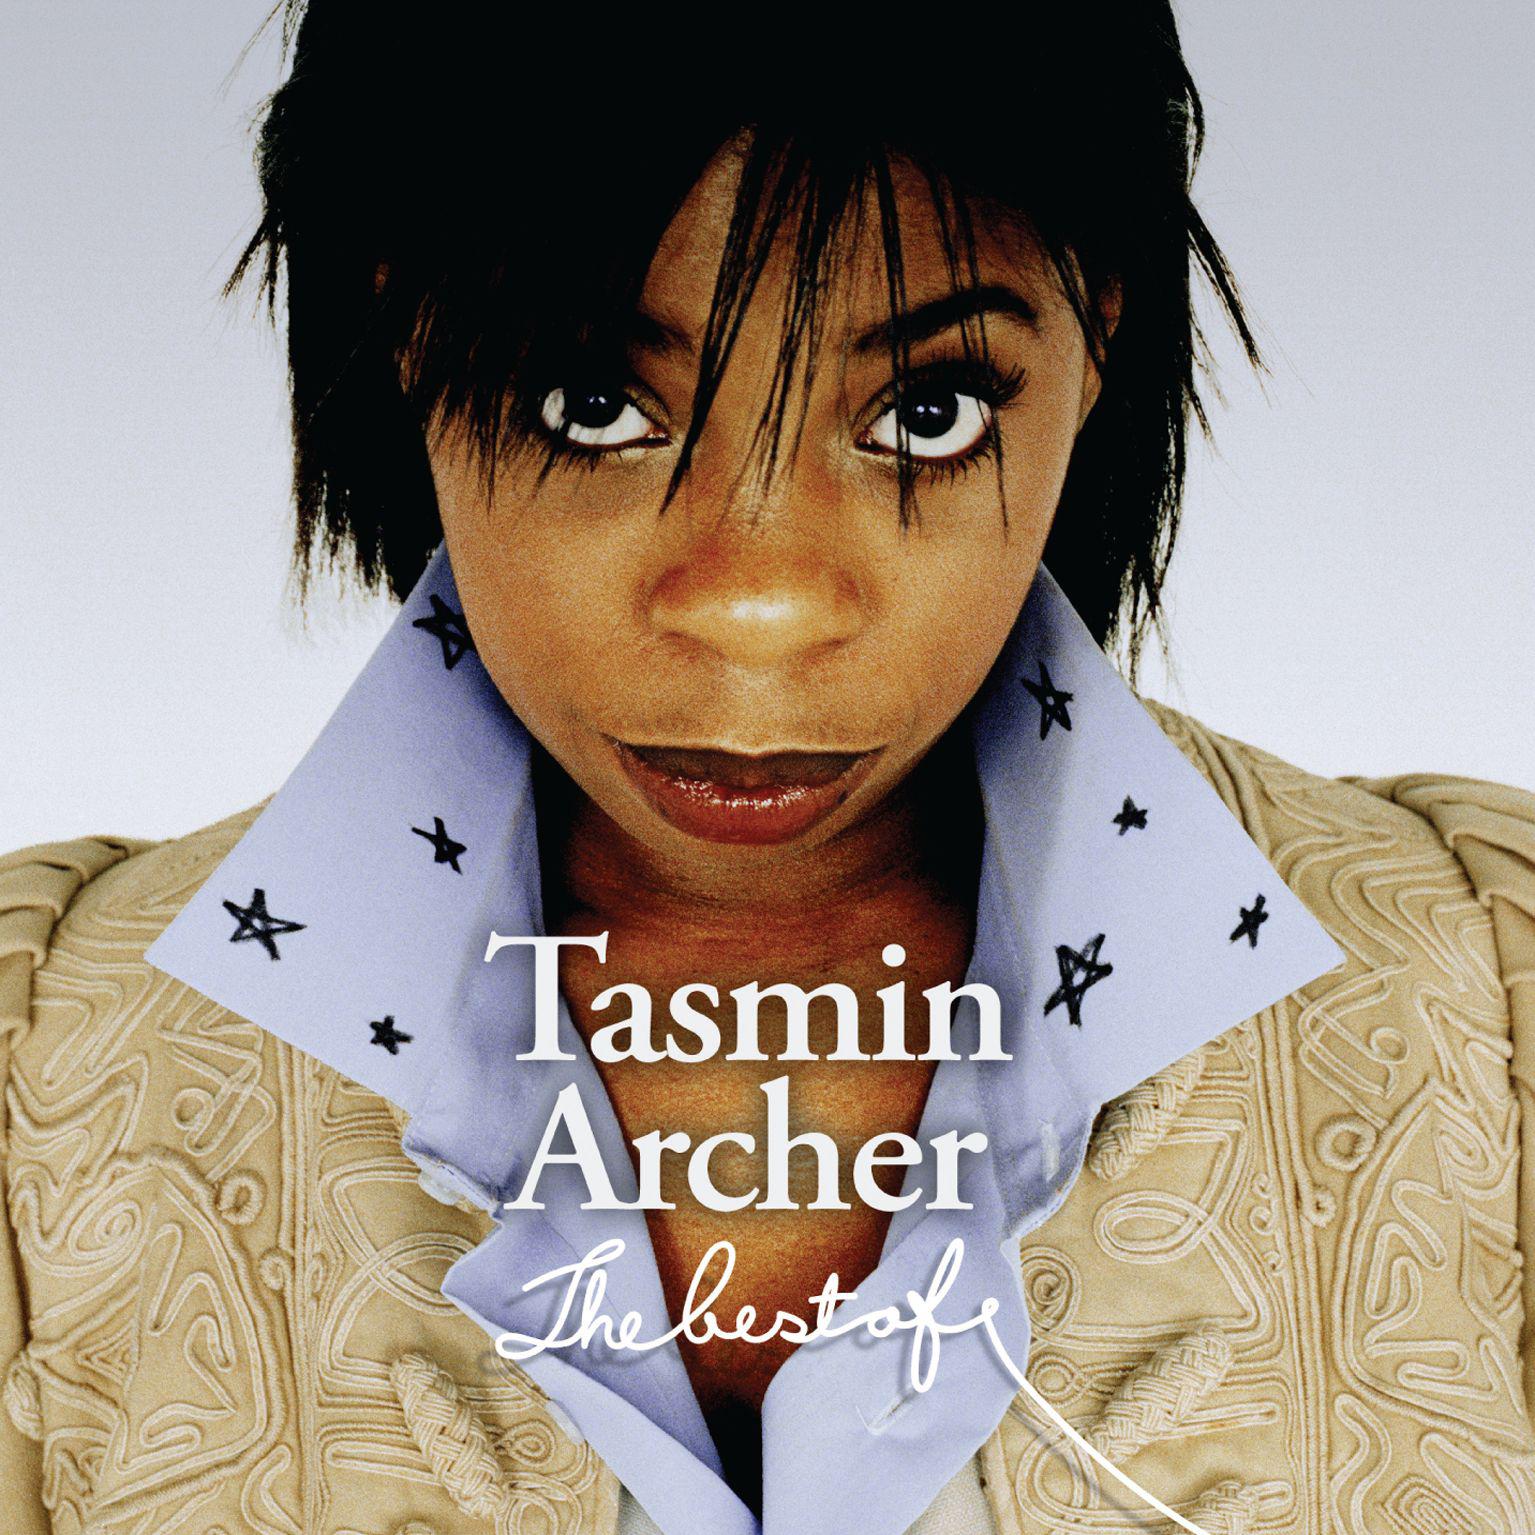 Tasmin Archer - One More Good Night with the Boys